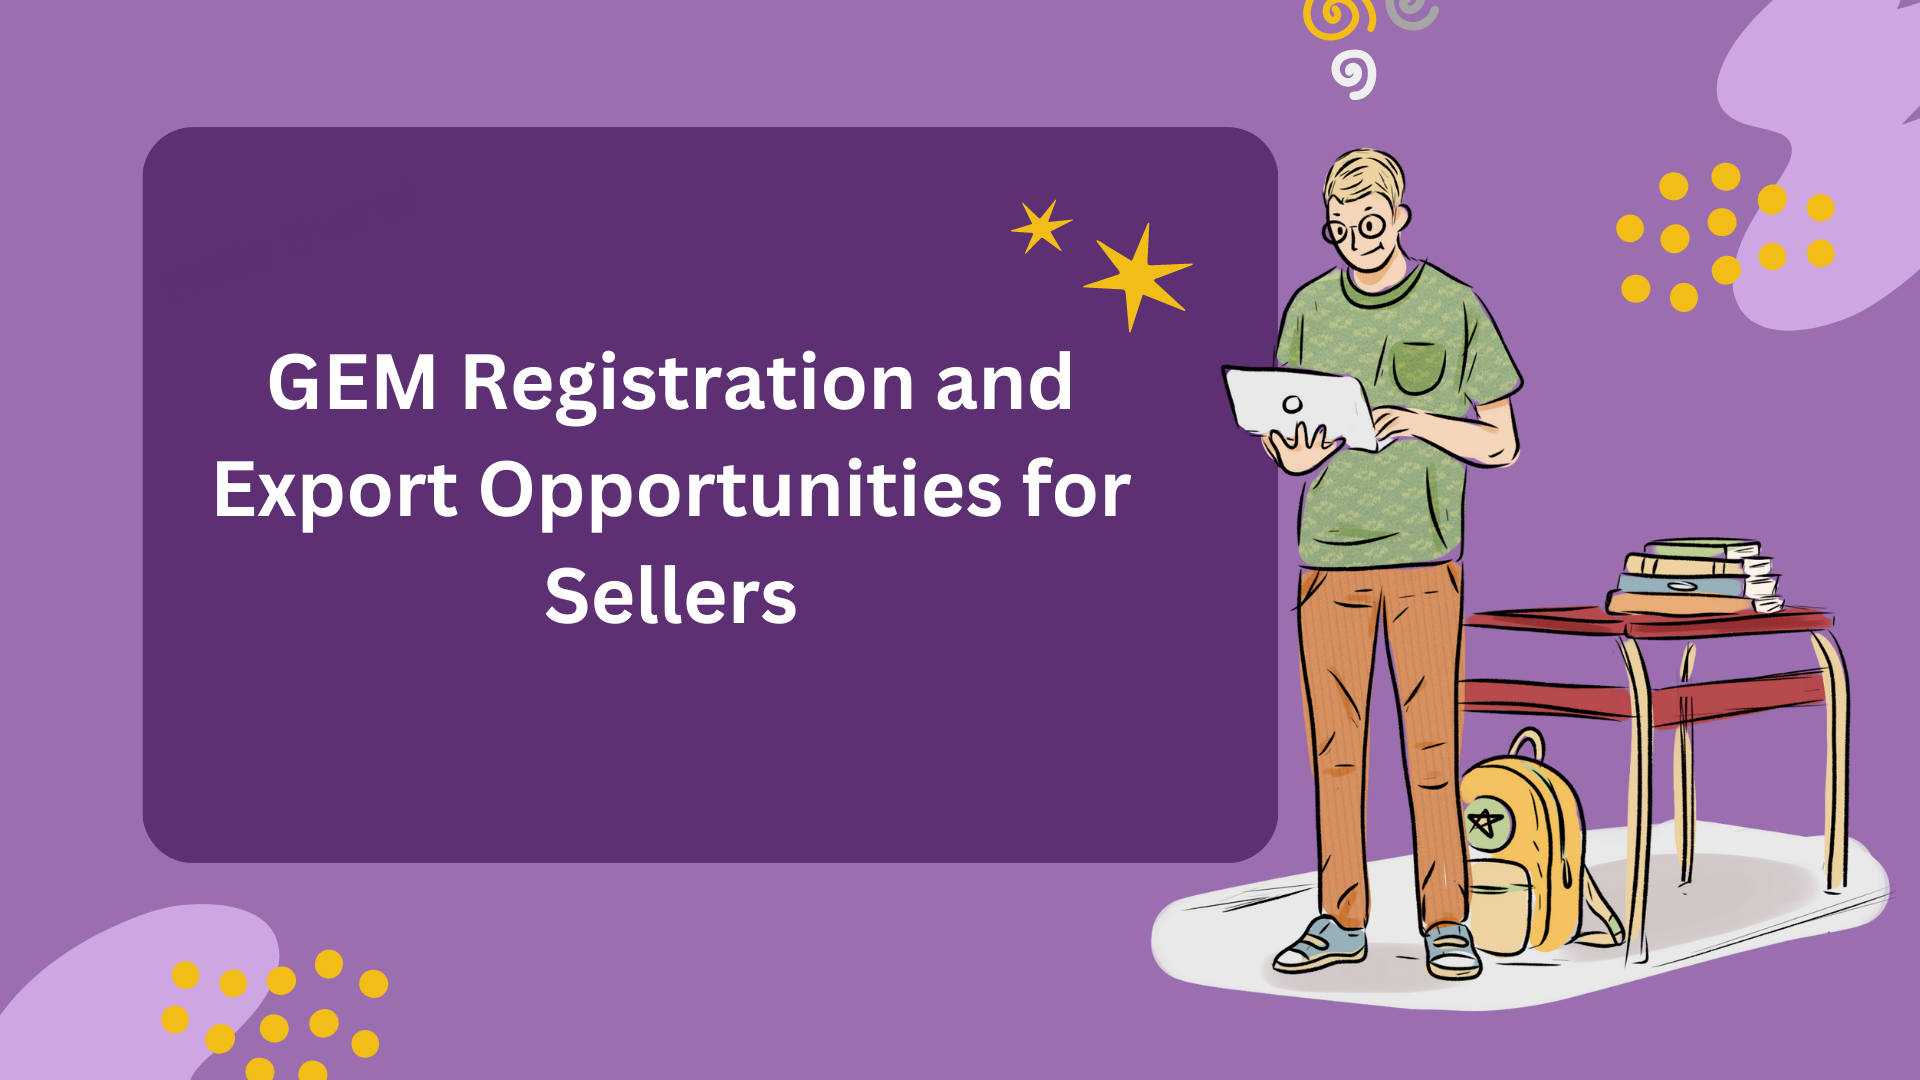 GEM Registration and Export Opportunities for Sellers